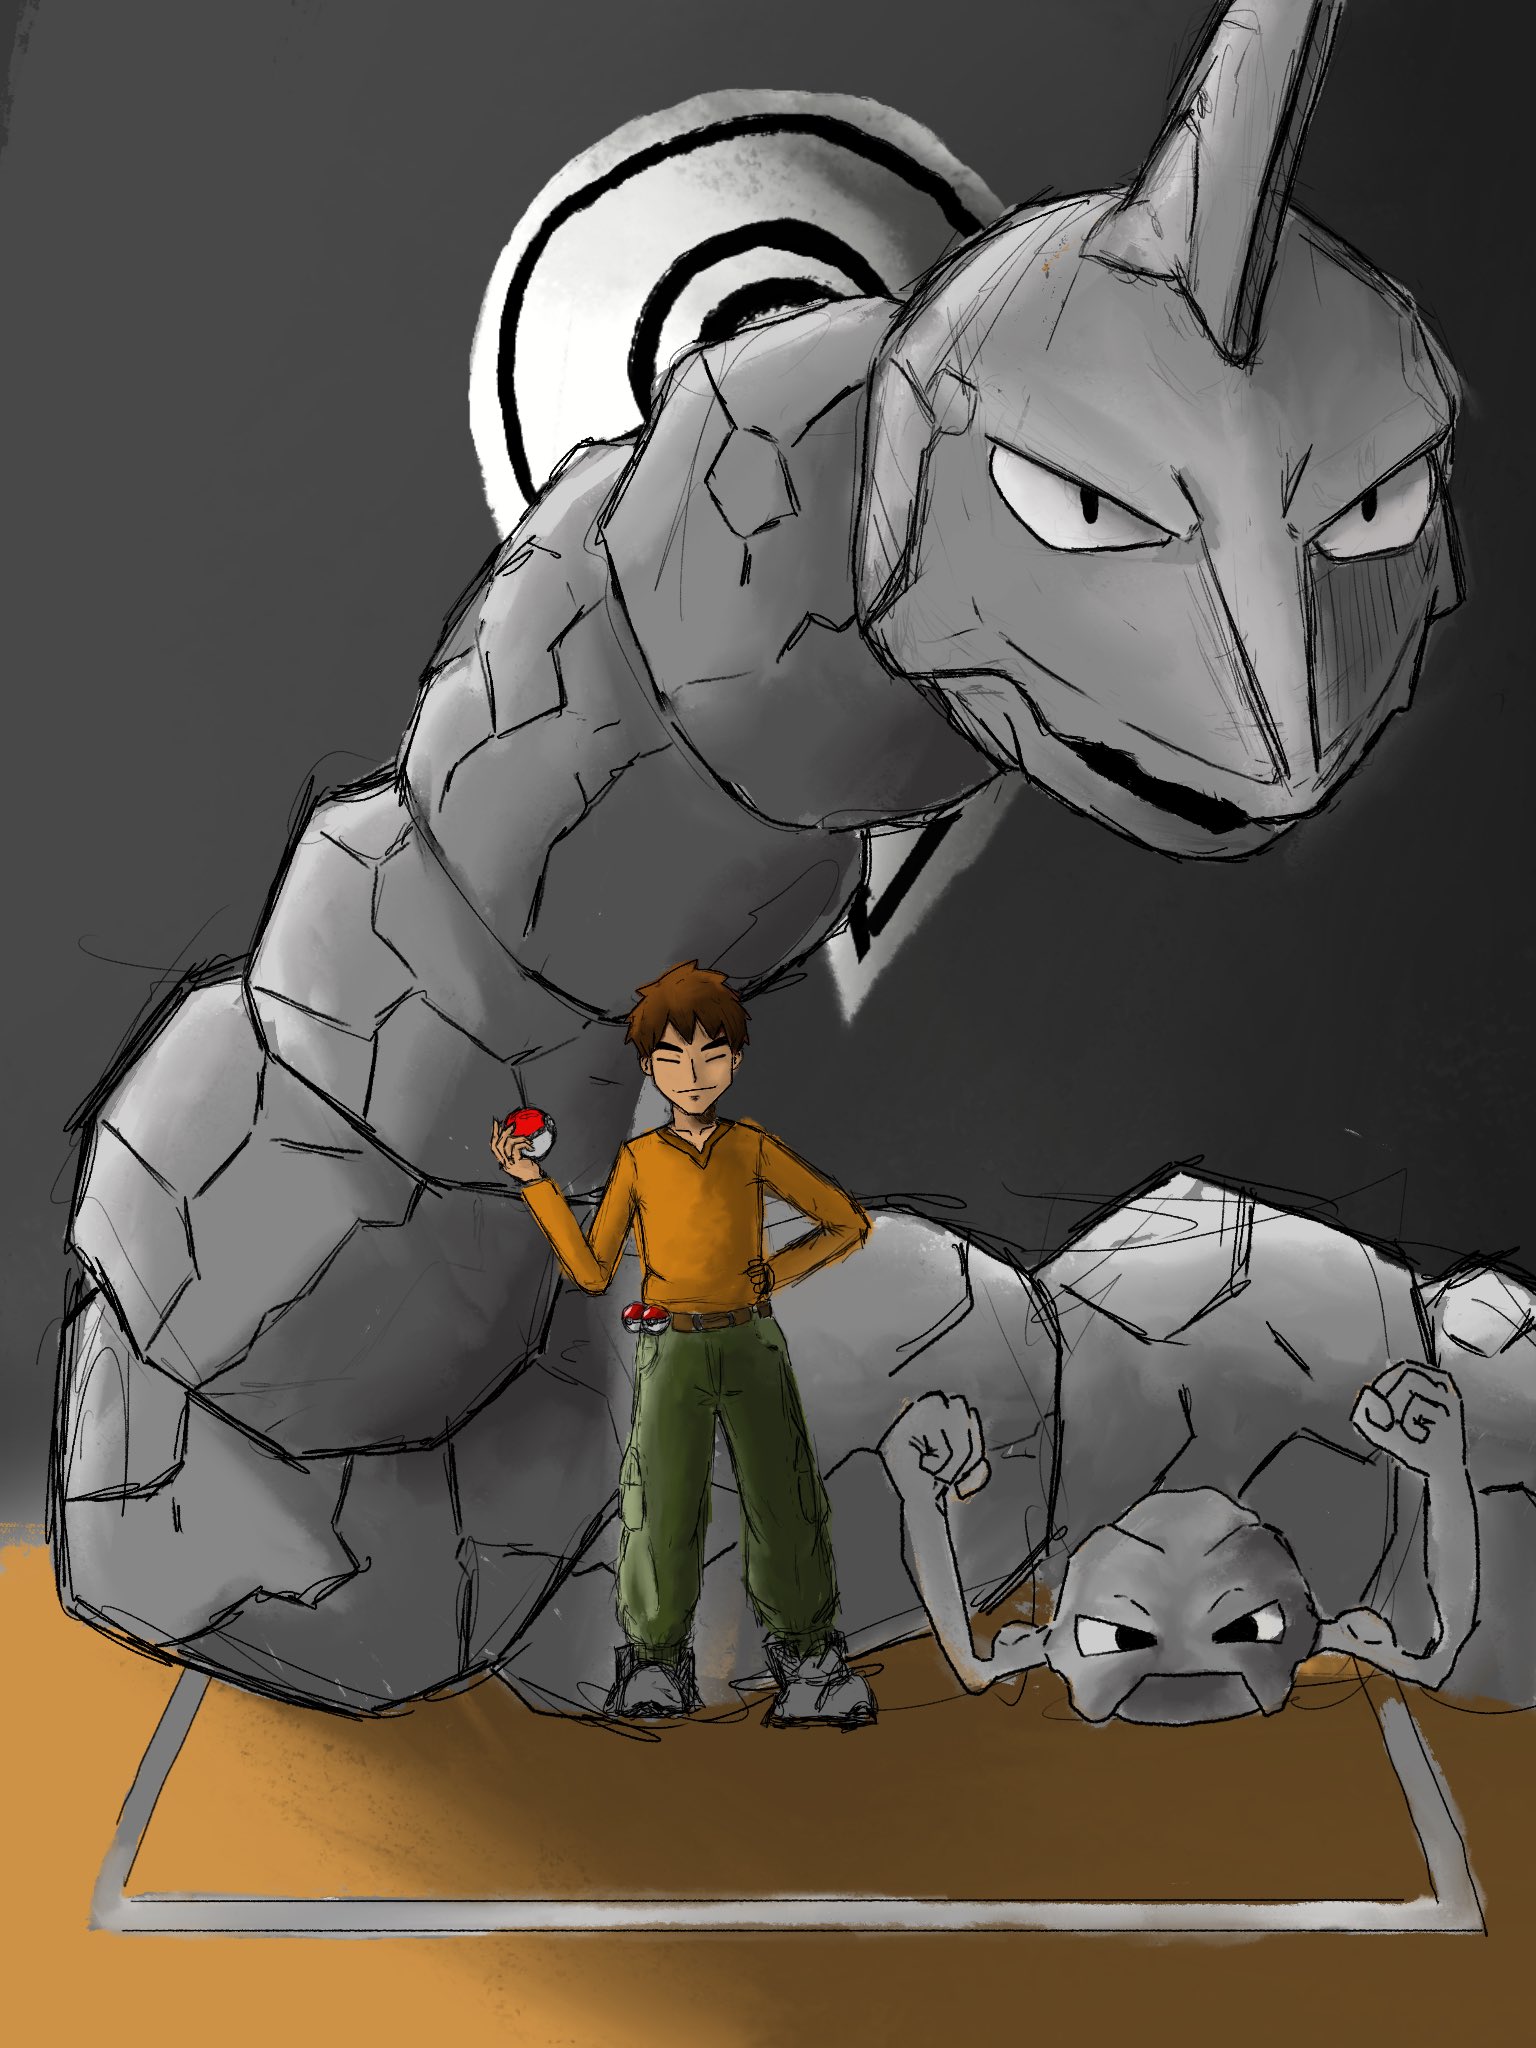 onix, geodude, roark, and cranidos (pokemon and 1 more) drawn by star_light